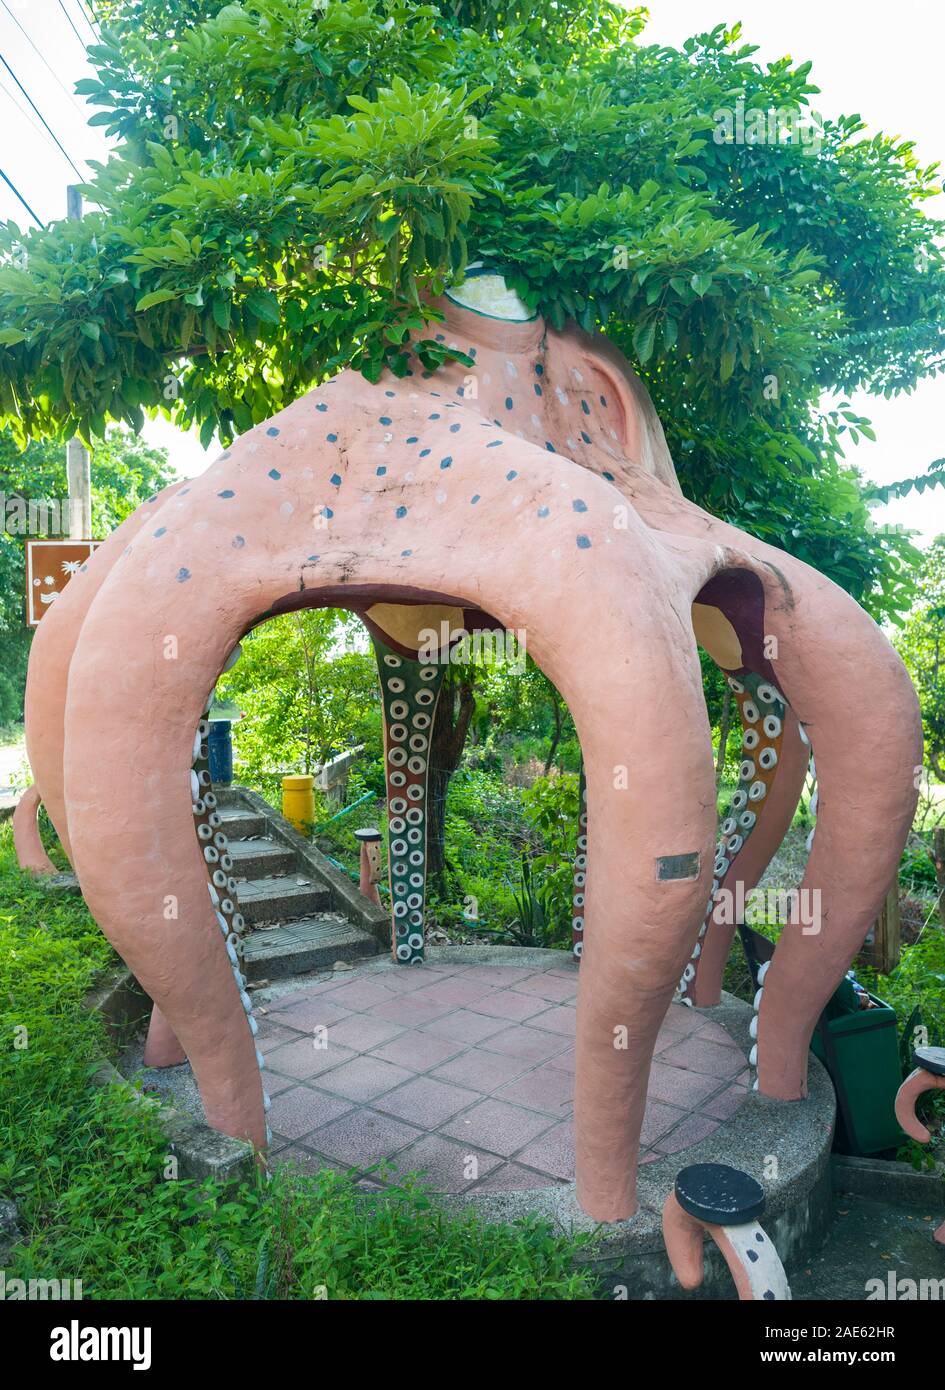 Octopus sculpture on the island of Providencia, Colombia. Stock Photo